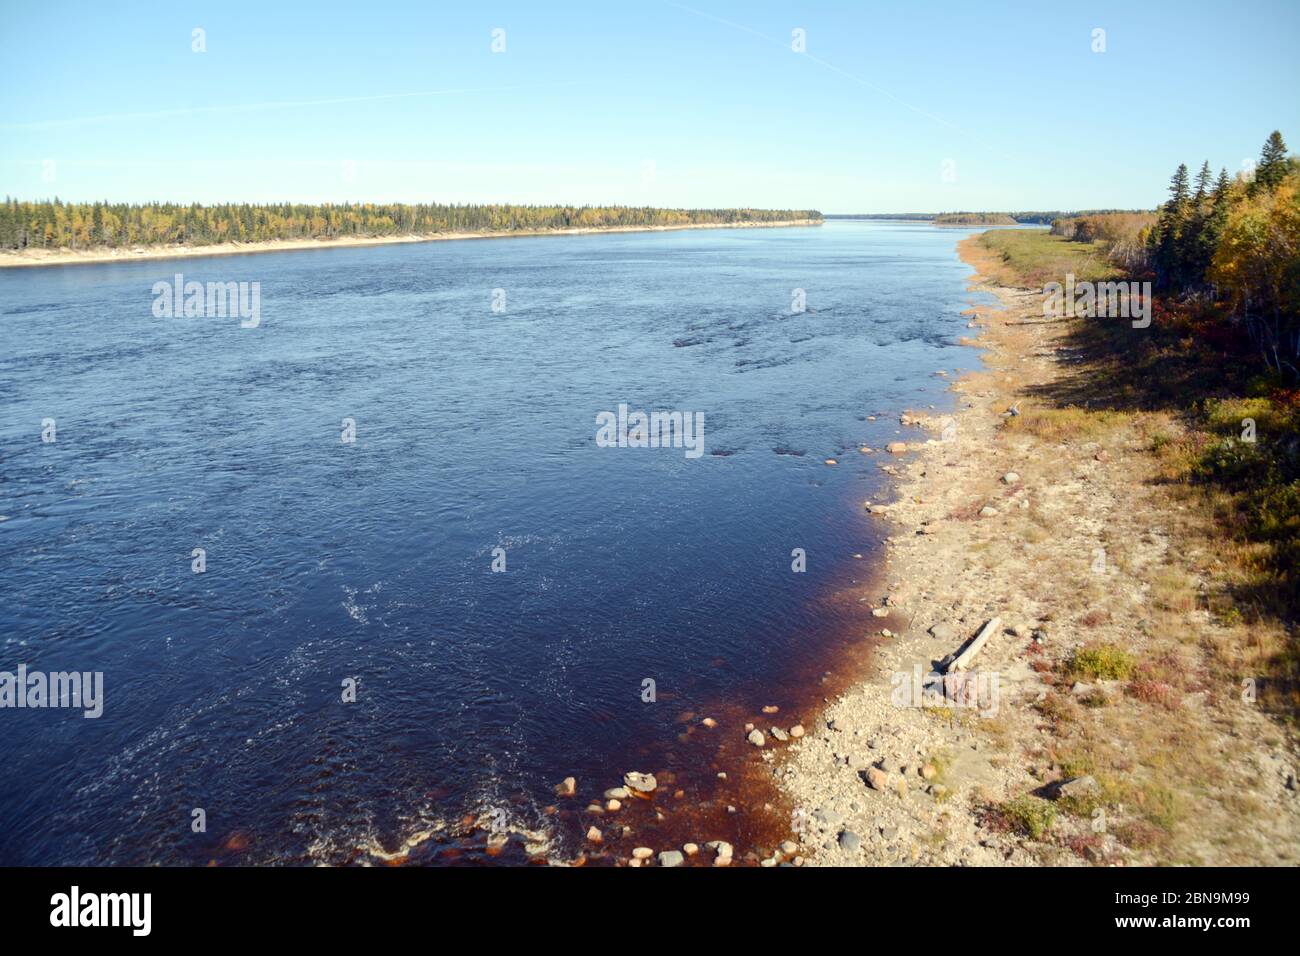 The Moose River which flows north into James Bay, near the indigenous Cree towns of Moosonee and Moose Factory, northern Ontario, Canada. Stock Photo